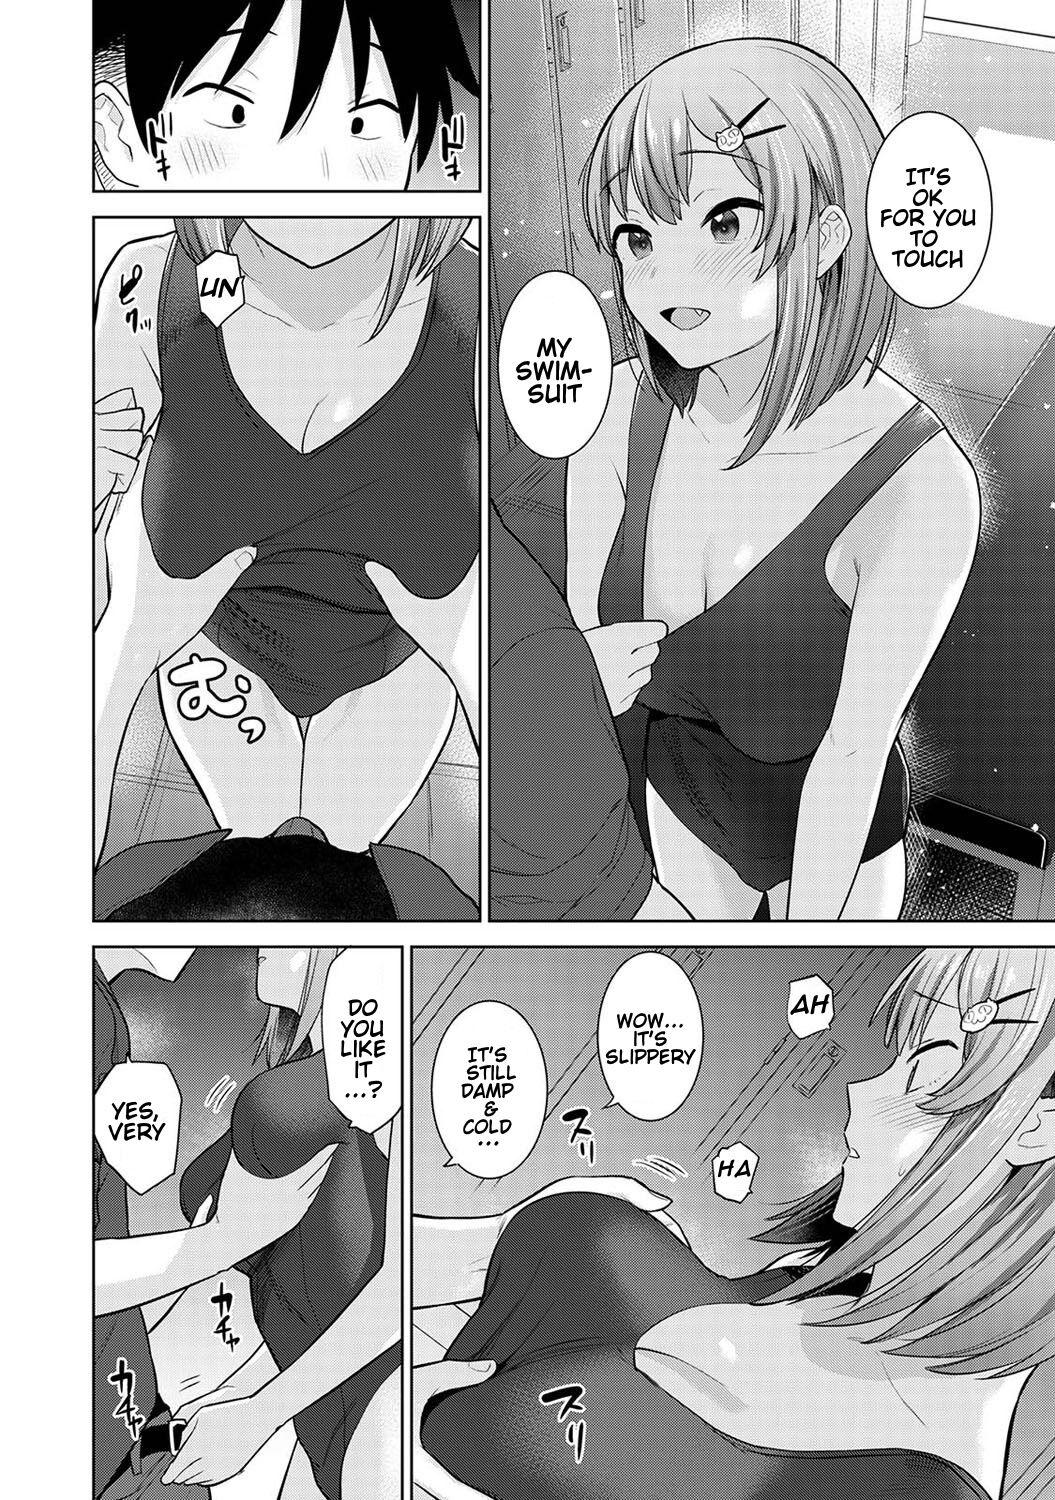 Teensnow SotsuAl Cameraman to Shite Ichinenkan Joshikou no Event e Doukou Suru Koto ni Natta Hanashi | A Story About How I Ended Up Being A Yearbook Cameraman at an All Girls' School For A Year Ch. 5 Peeing - Page 11